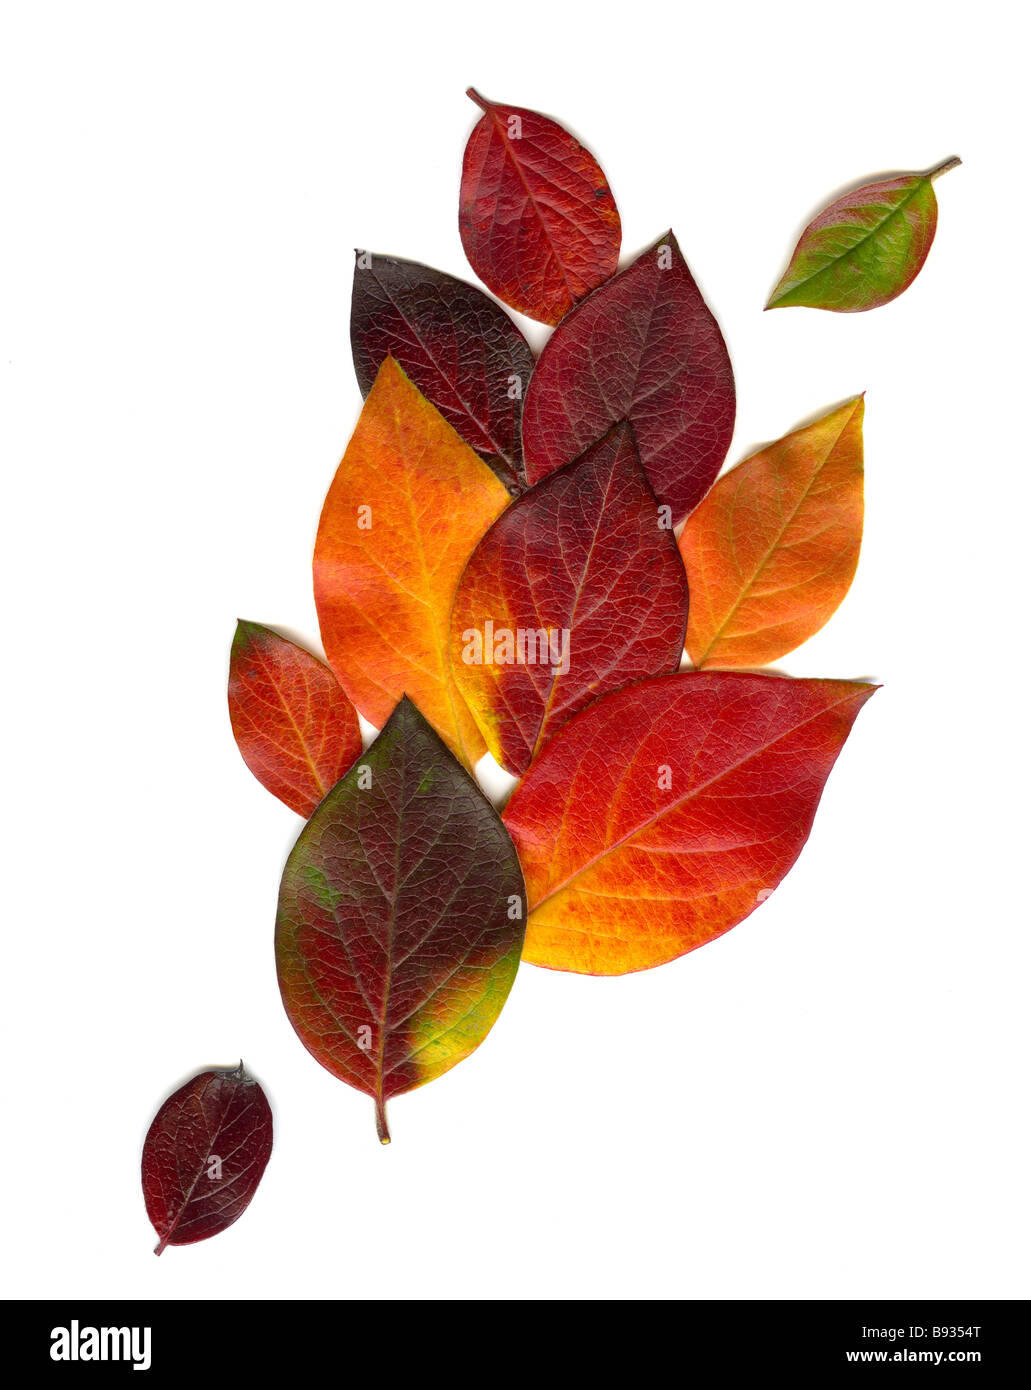 Cotoneaster fall leaves on white background with copyspace Stock Photo